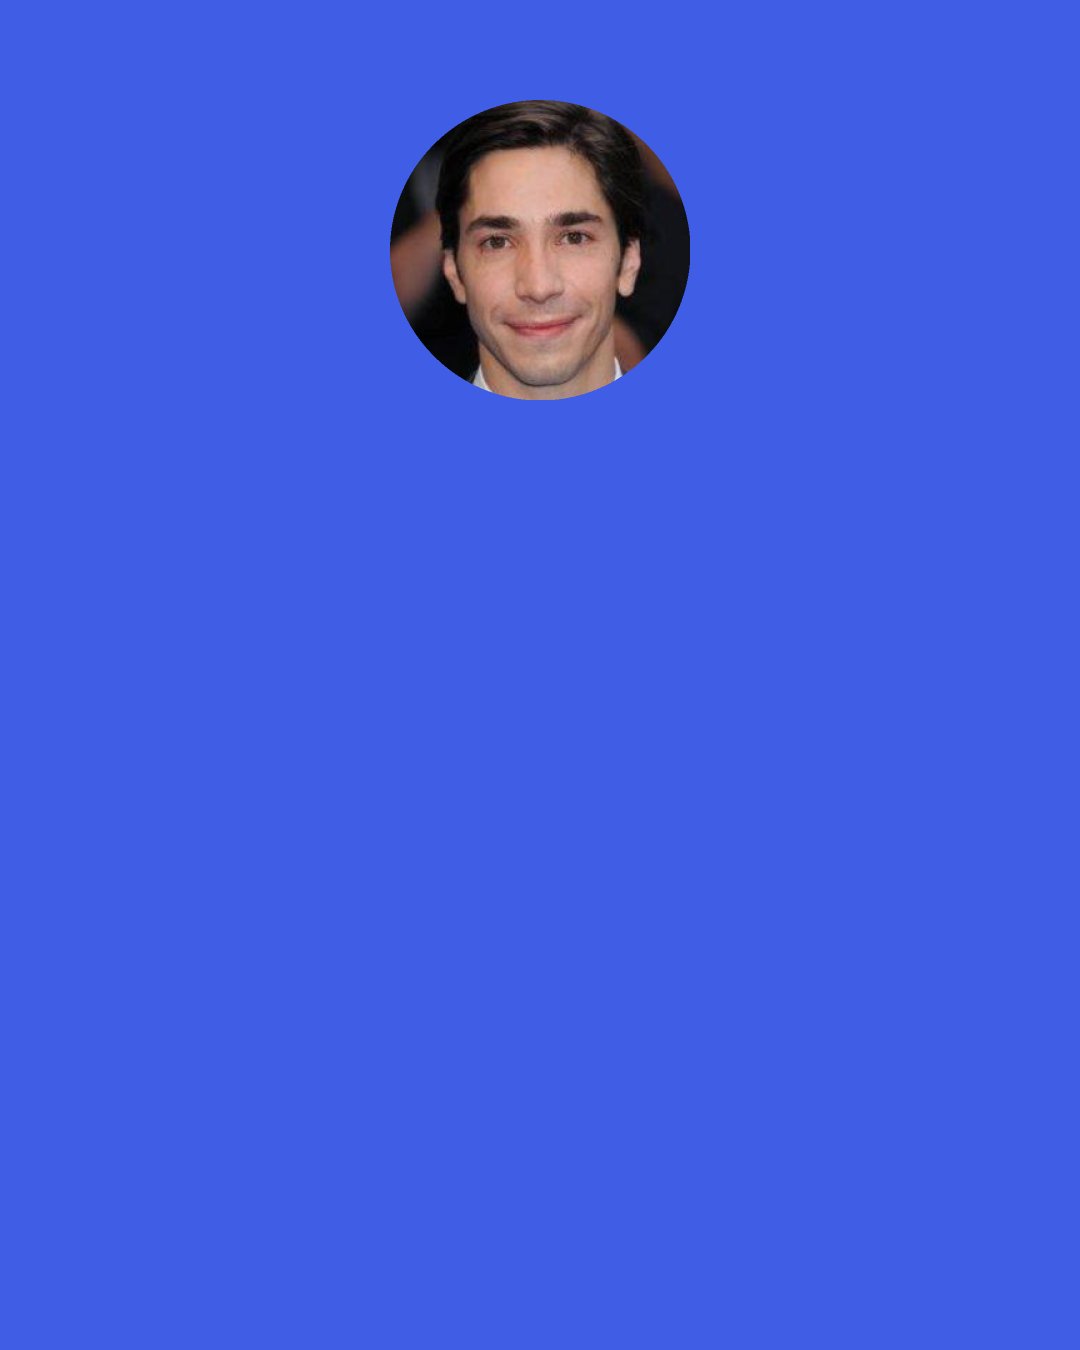 Justin Long: I look like a geeky hacker but I don’t know anything about computers.